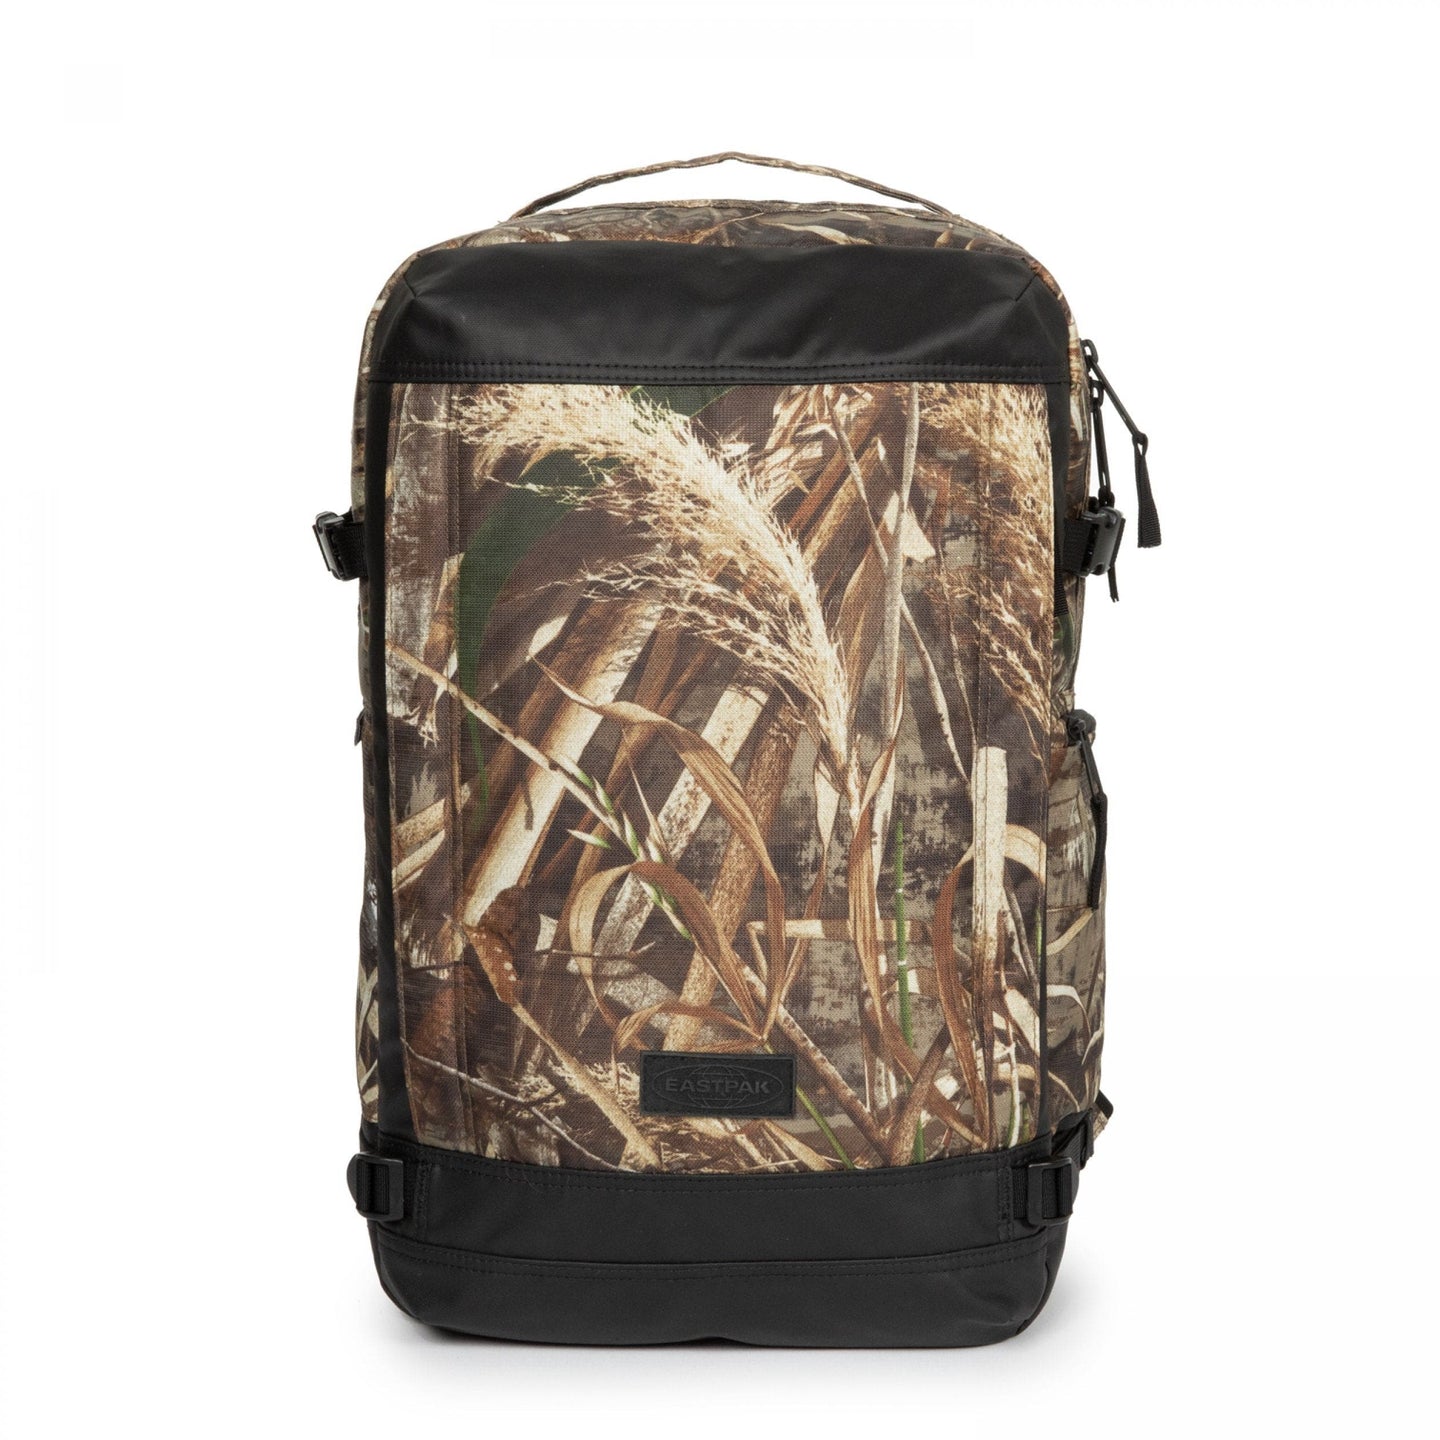 Tecum M Realtree Camo backpack front view